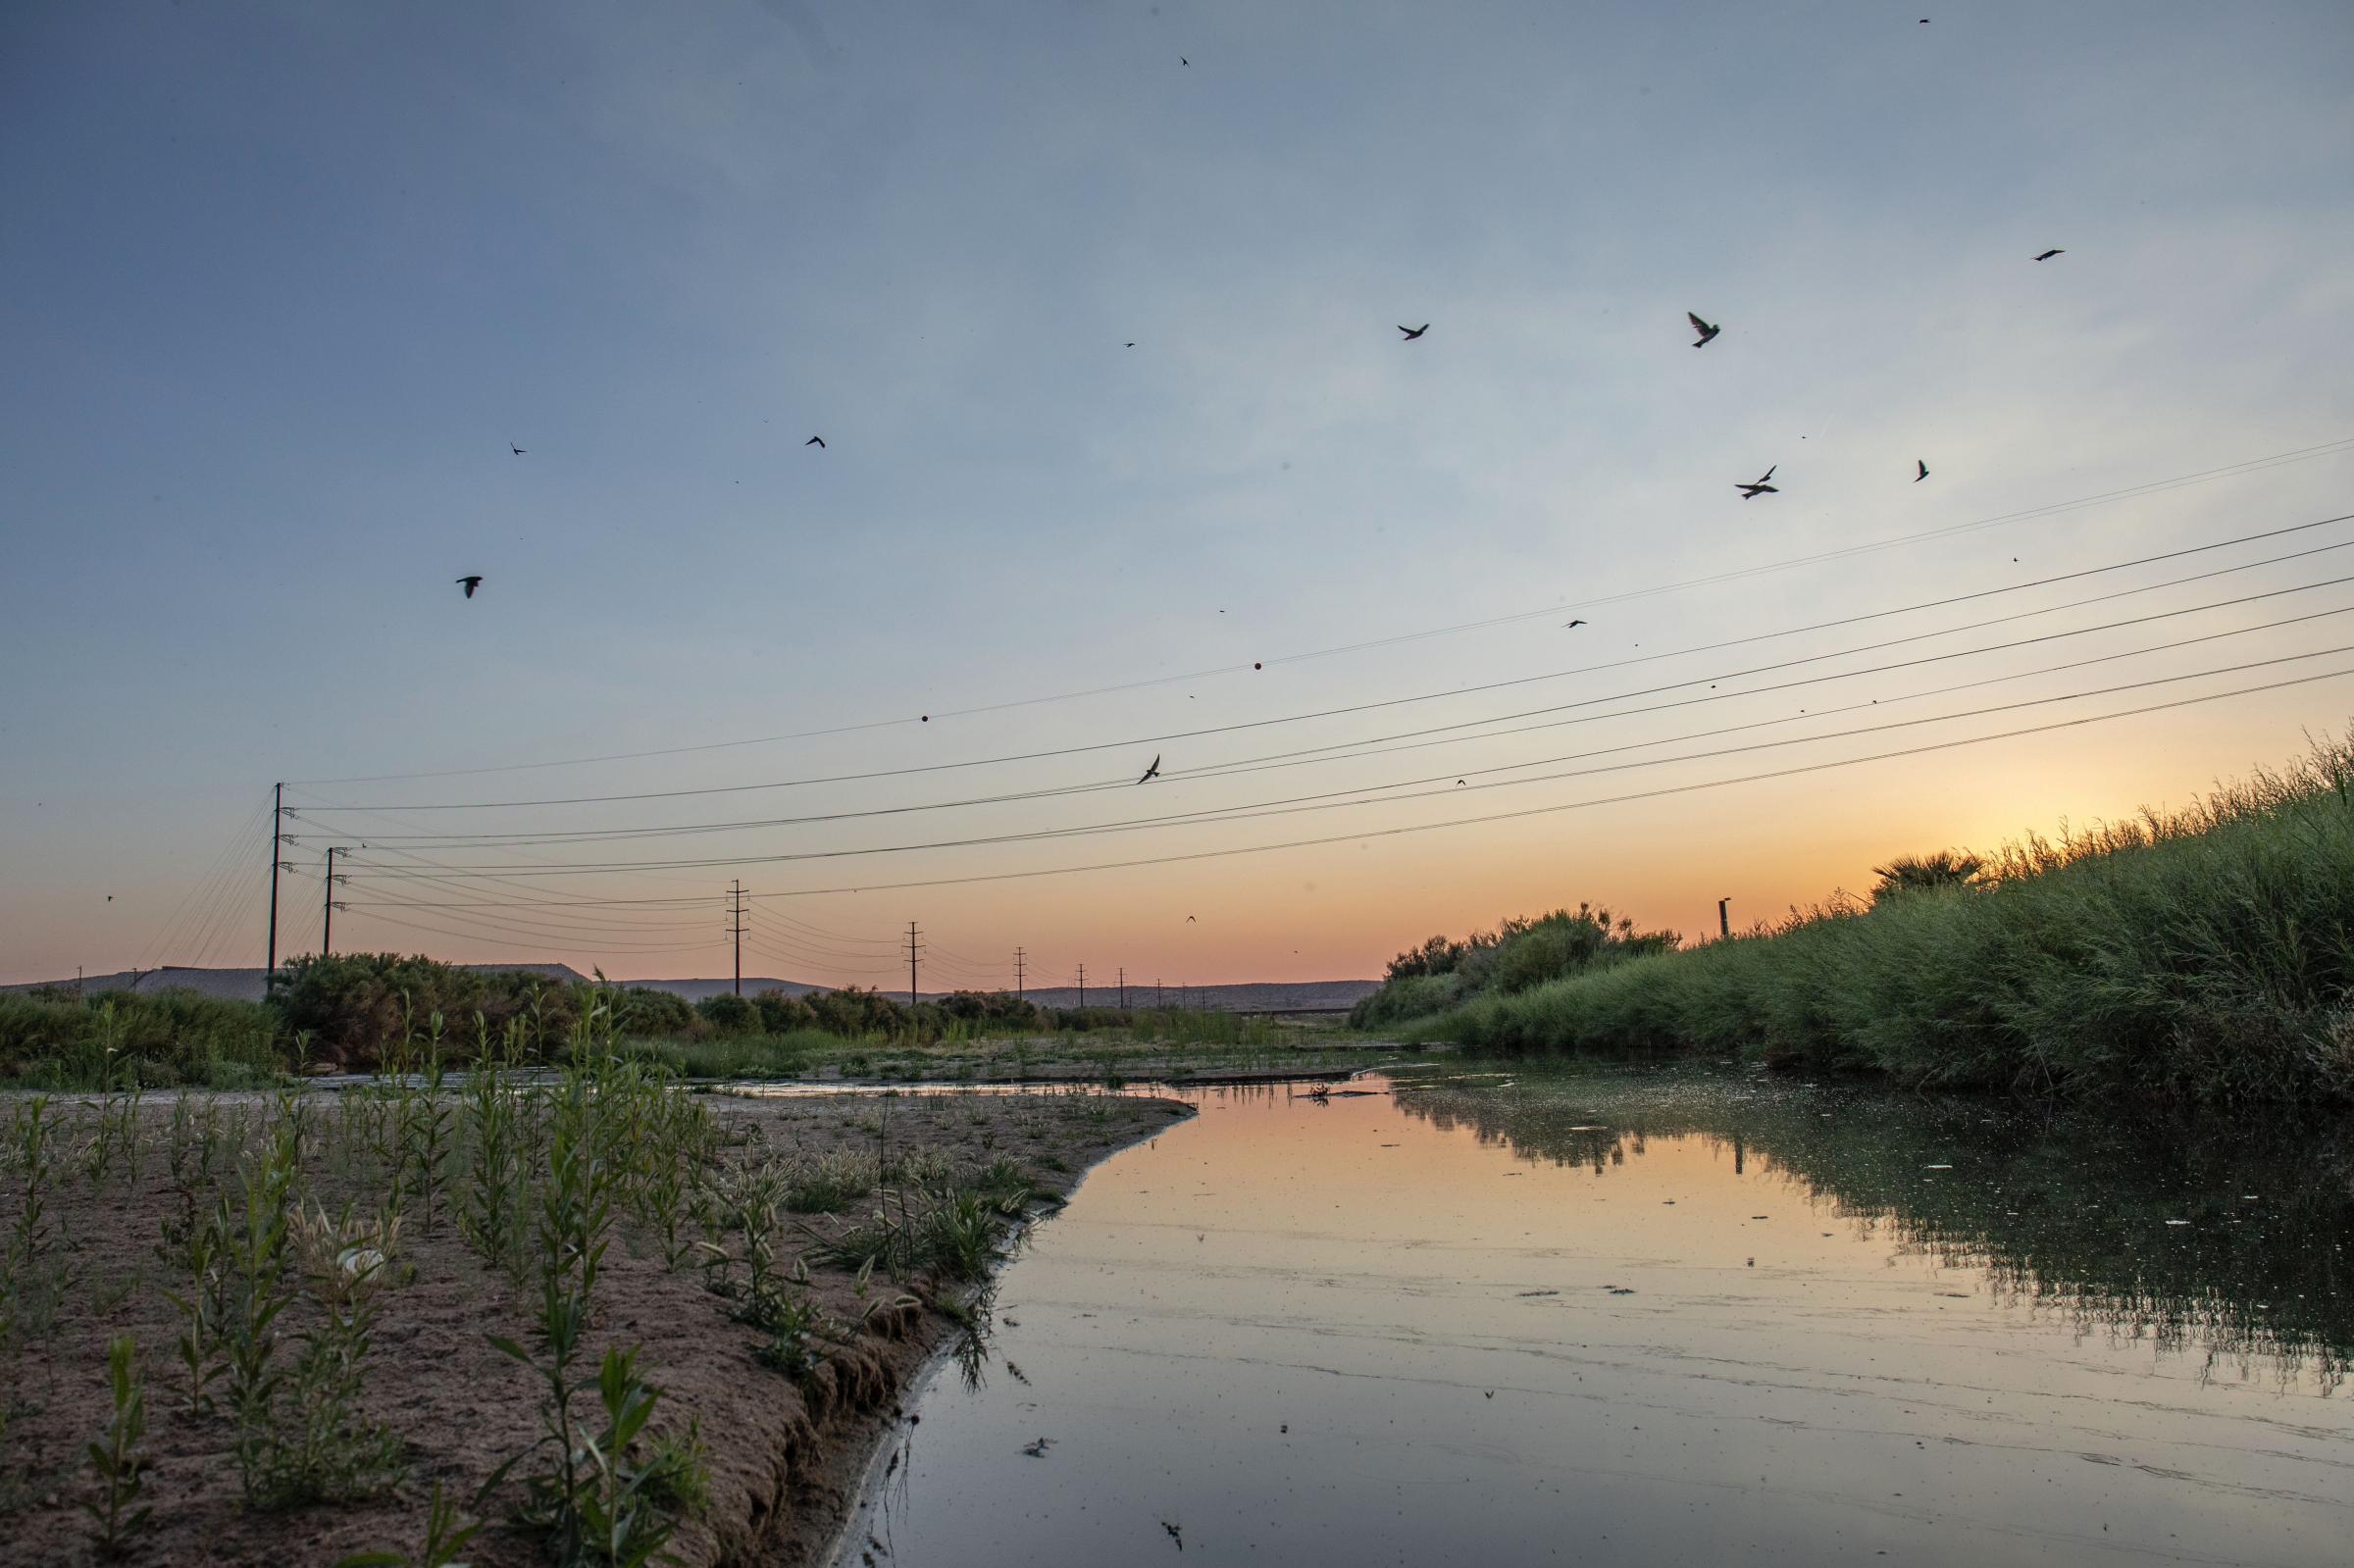 Crisis on the Rio Grande - Swifts fly to and from a bridge near the Sunland Park pools to roost for the night in nests they...